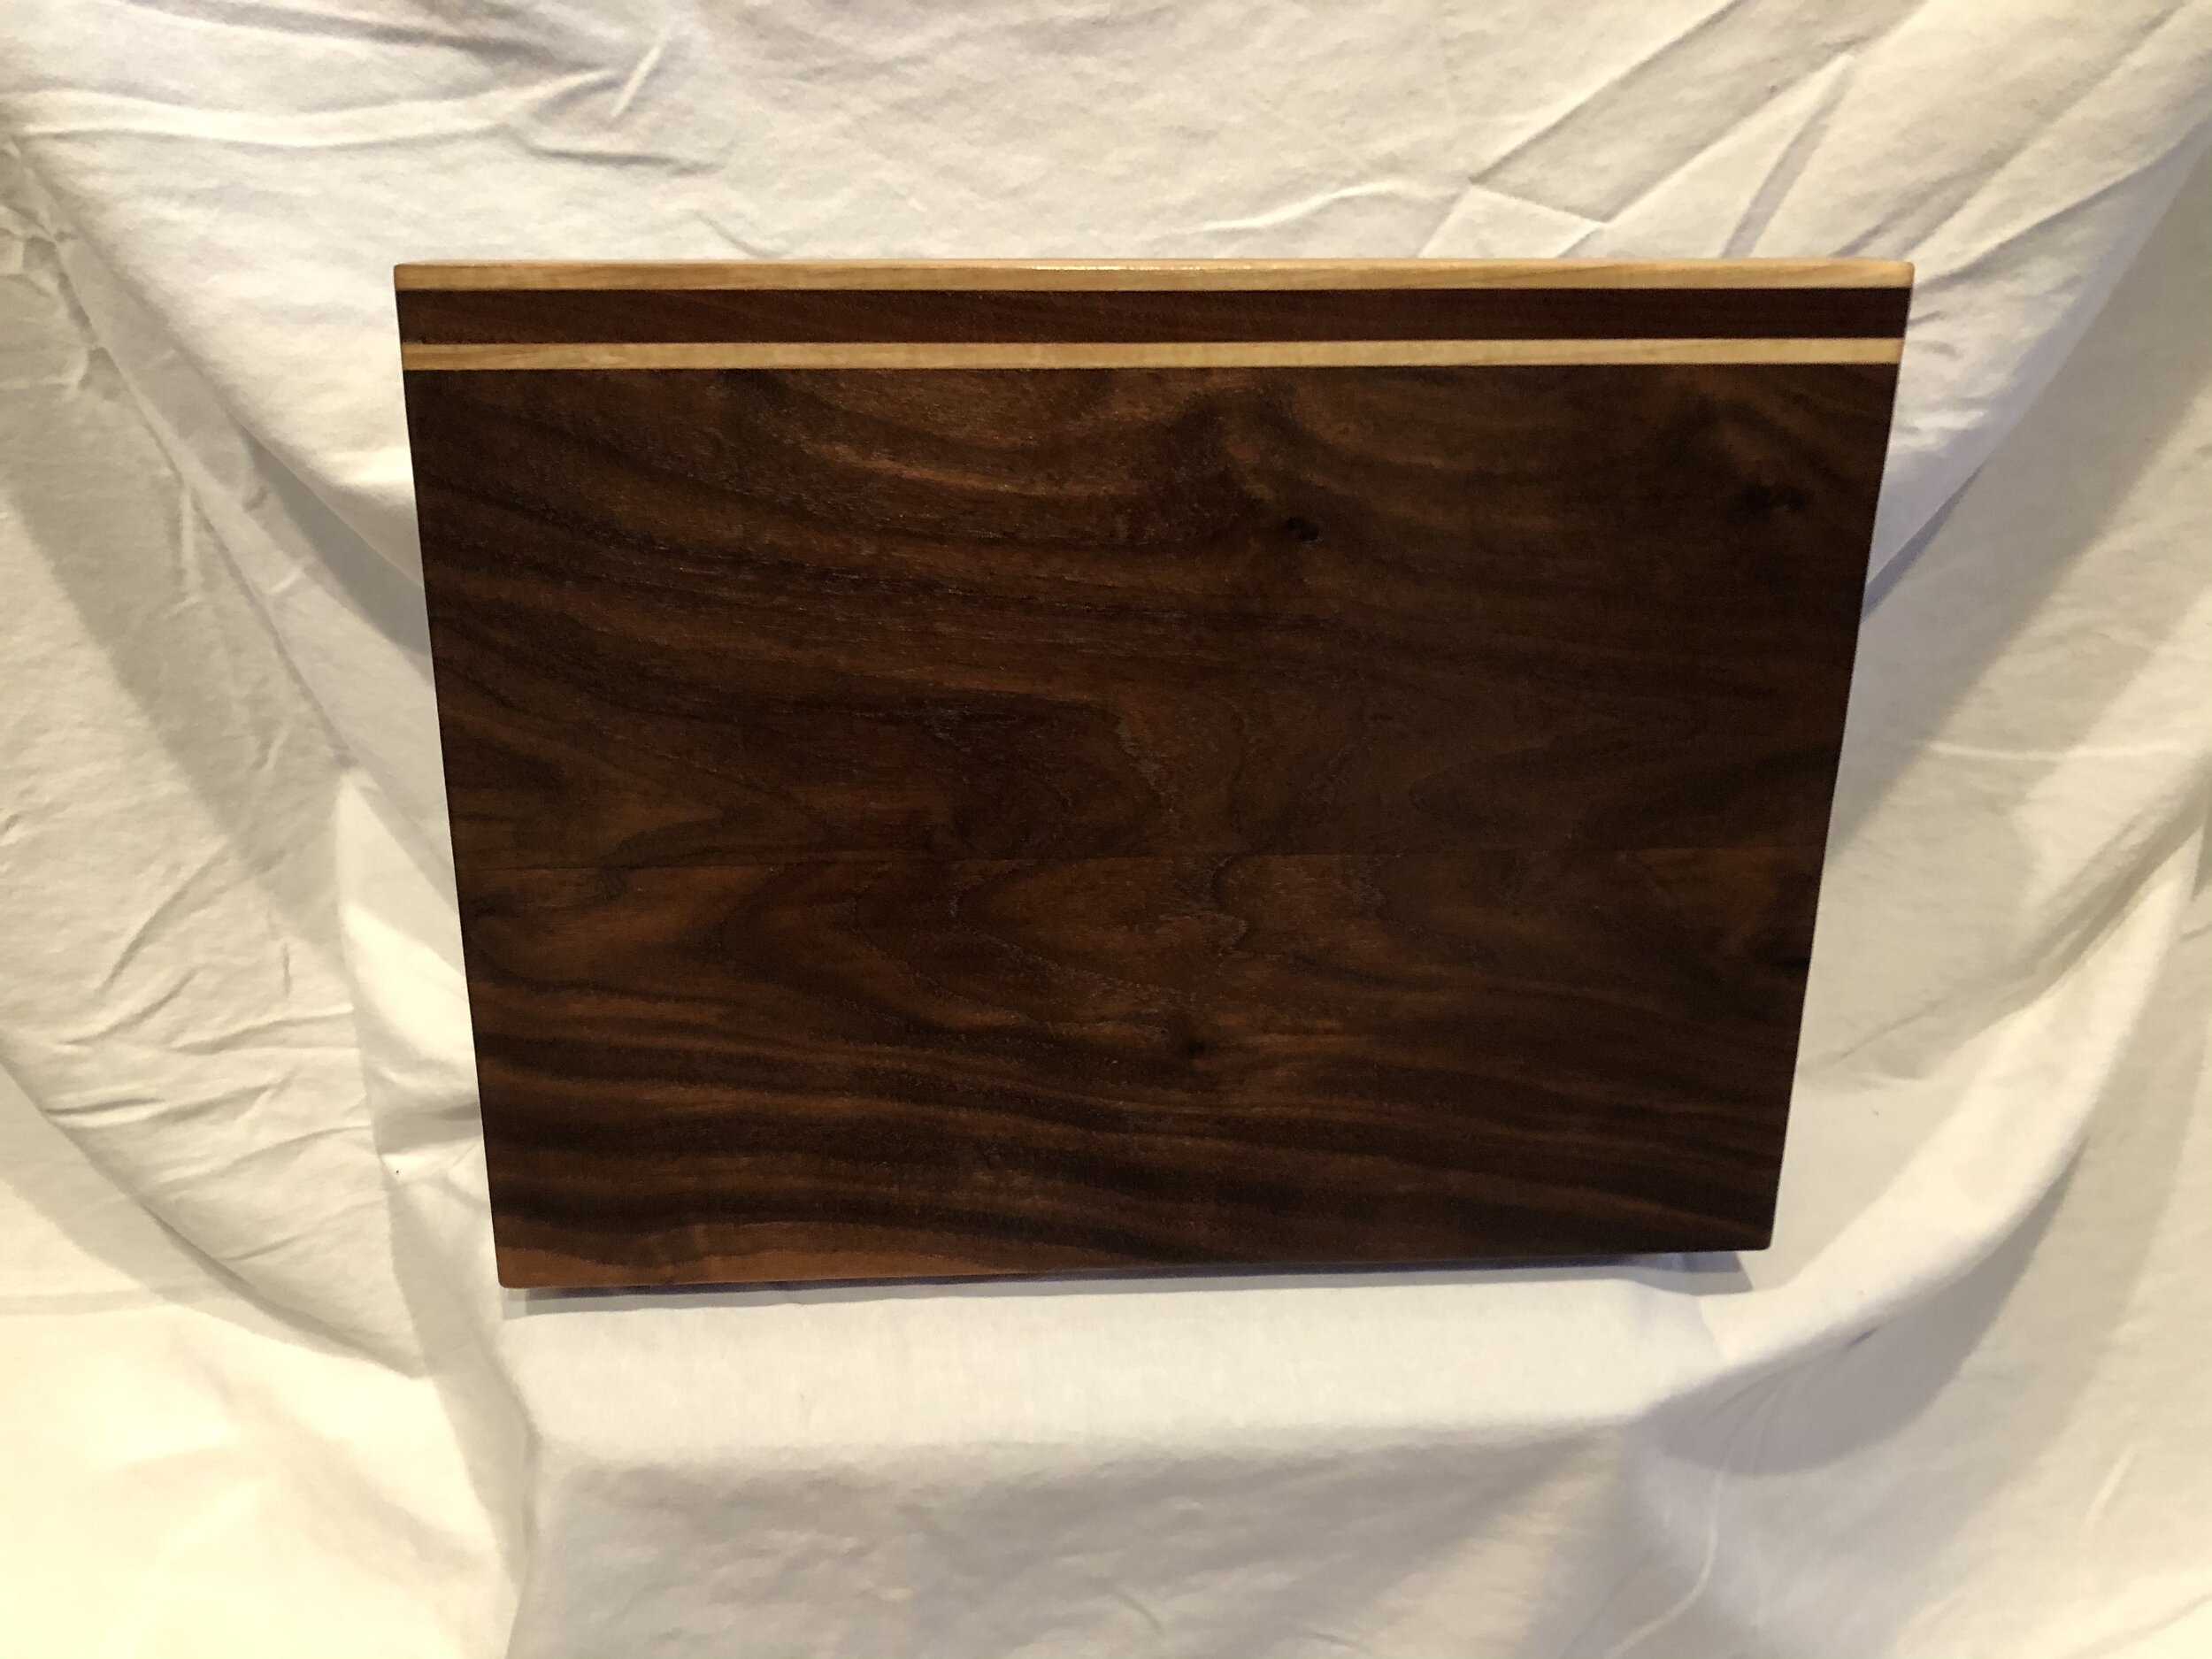 Black Walnut with Bloodwood and maple accents Wooden Carving Board Chiefs Board